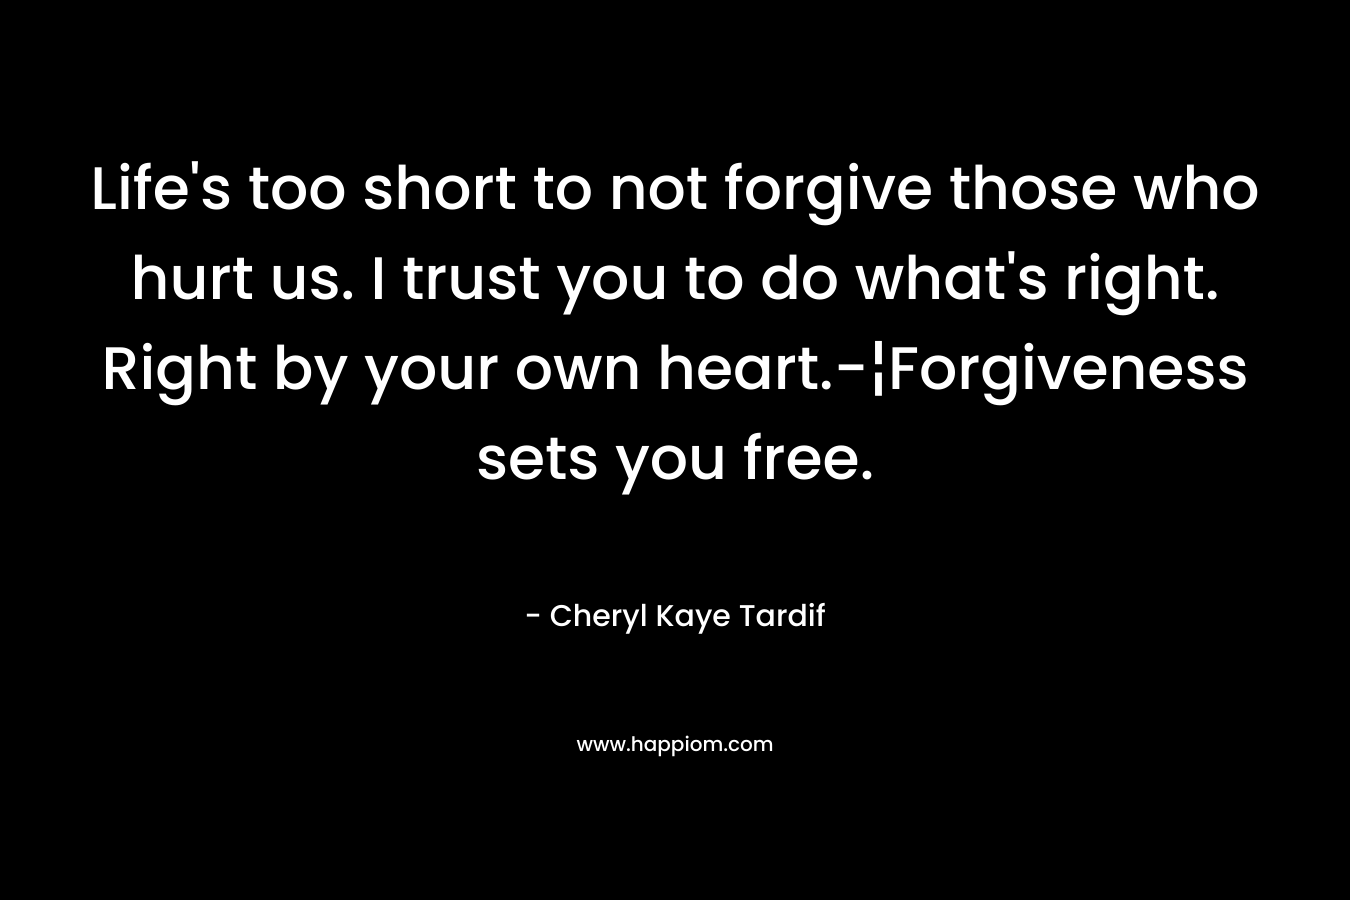 Life's too short to not forgive those who hurt us. I trust you to do what's right. Right by your own heart.-¦Forgiveness sets you free.